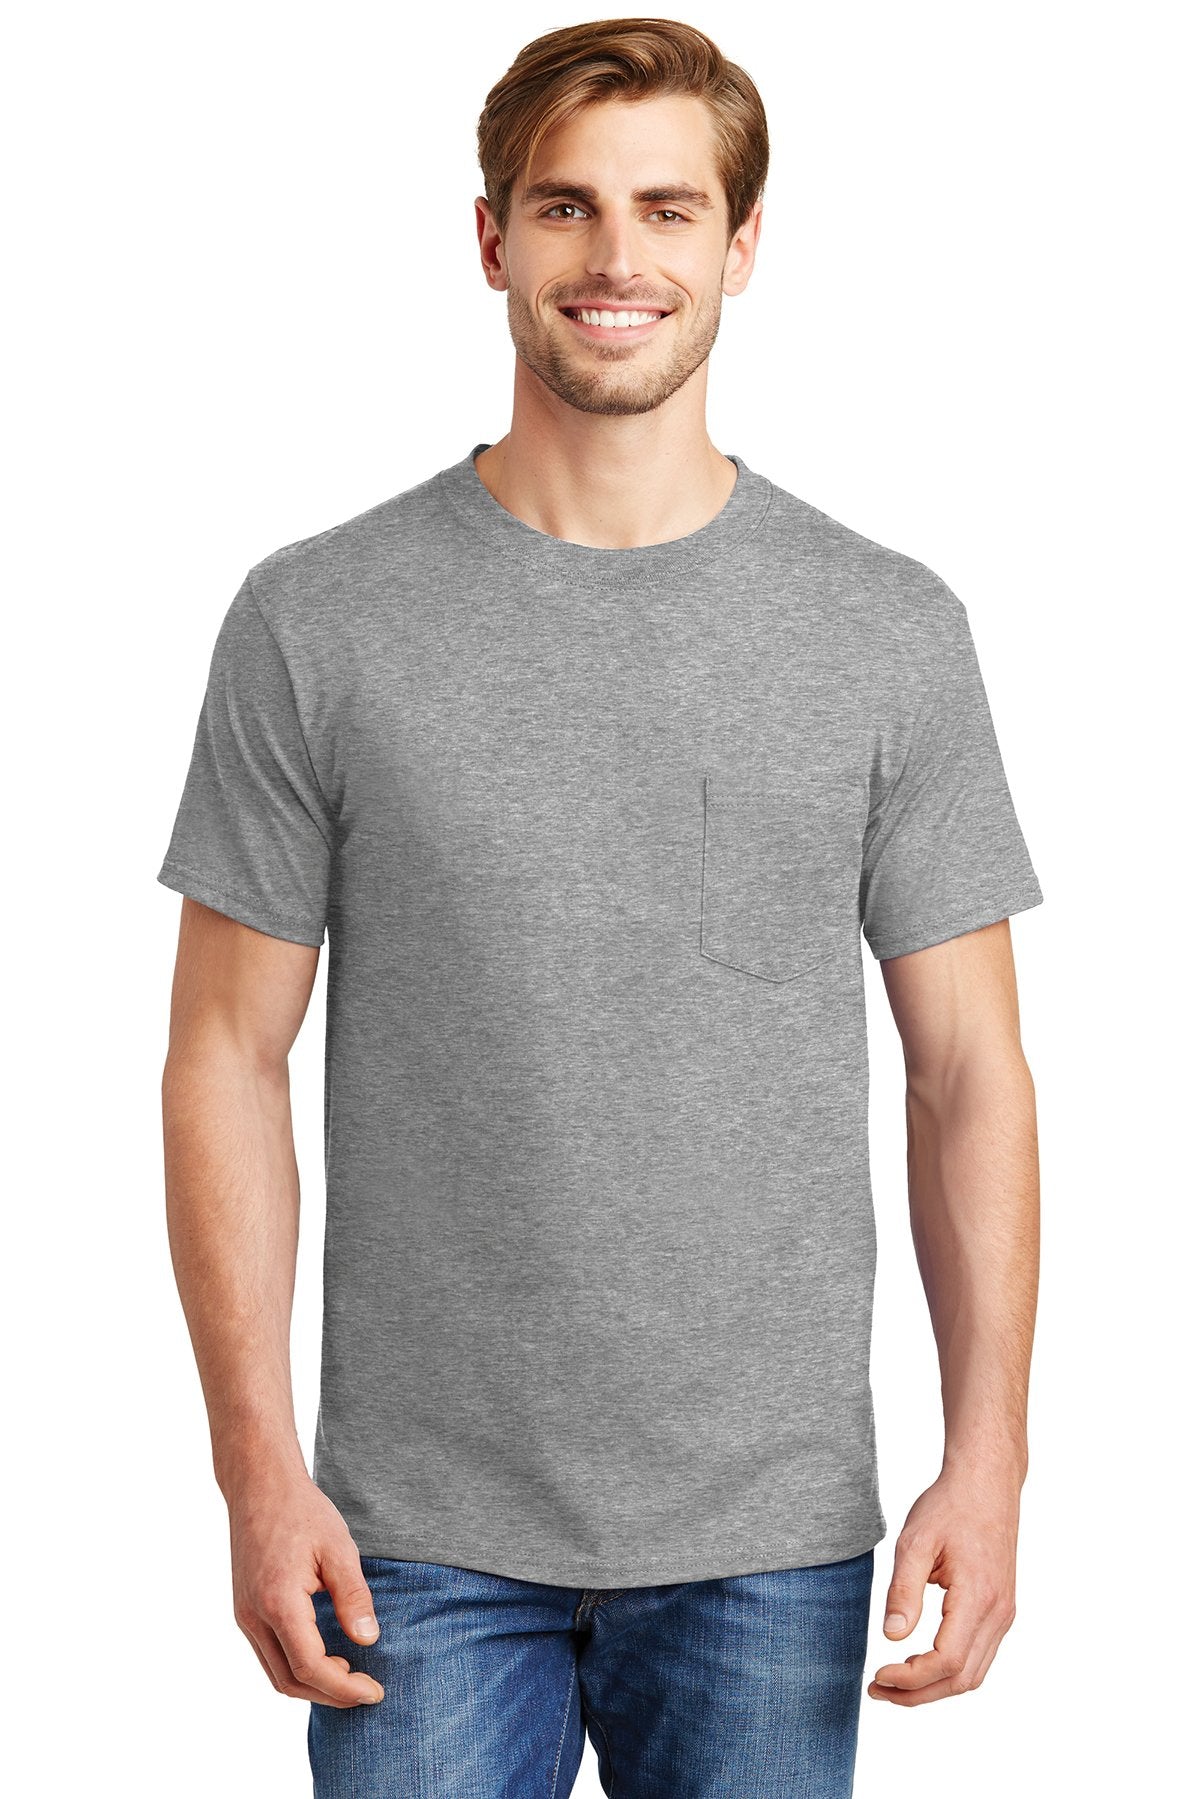 hanes beefy cotton t shirt with pocket 5190 light steel